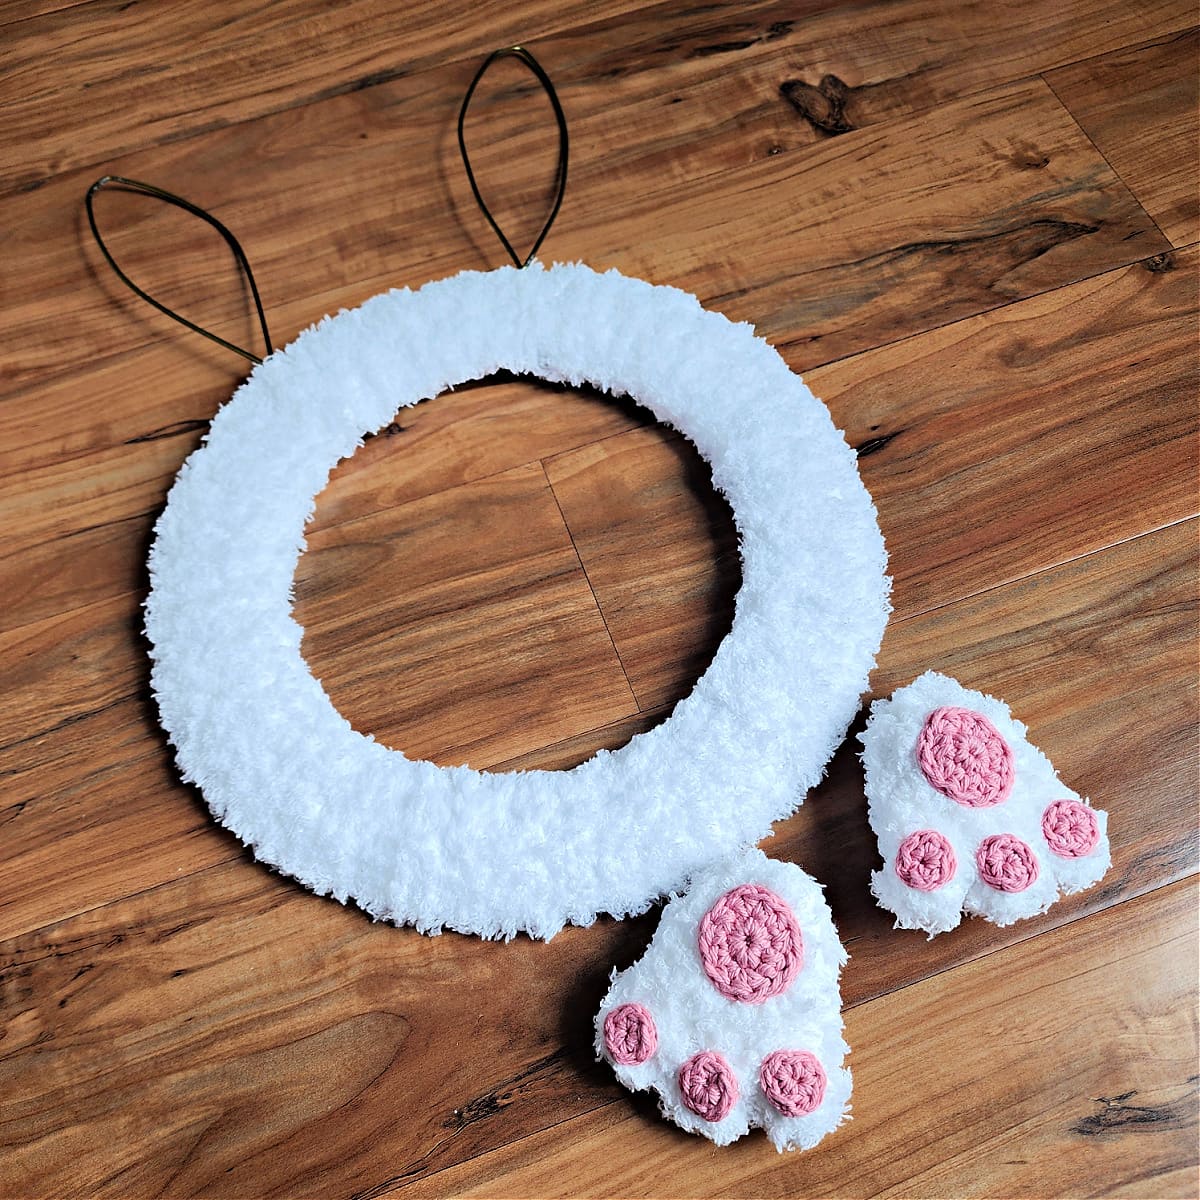 Two crochet bunny feet with pink toes and pads laying next to partially finished bunny wreath.